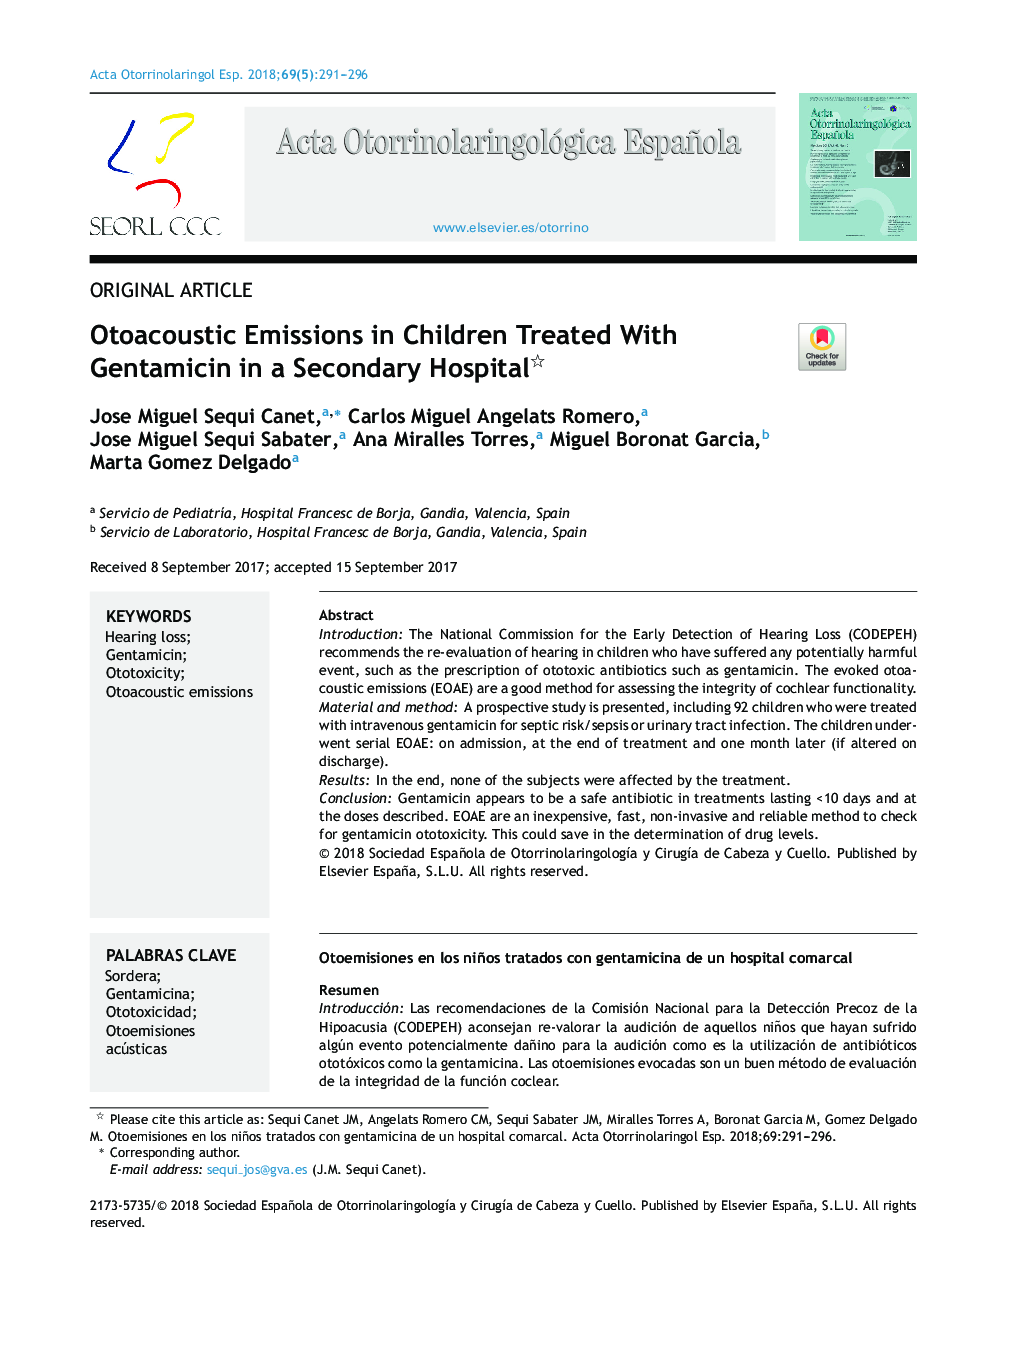 Otoacoustic Emissions in Children Treated With Gentamicin in a Secondary Hospital